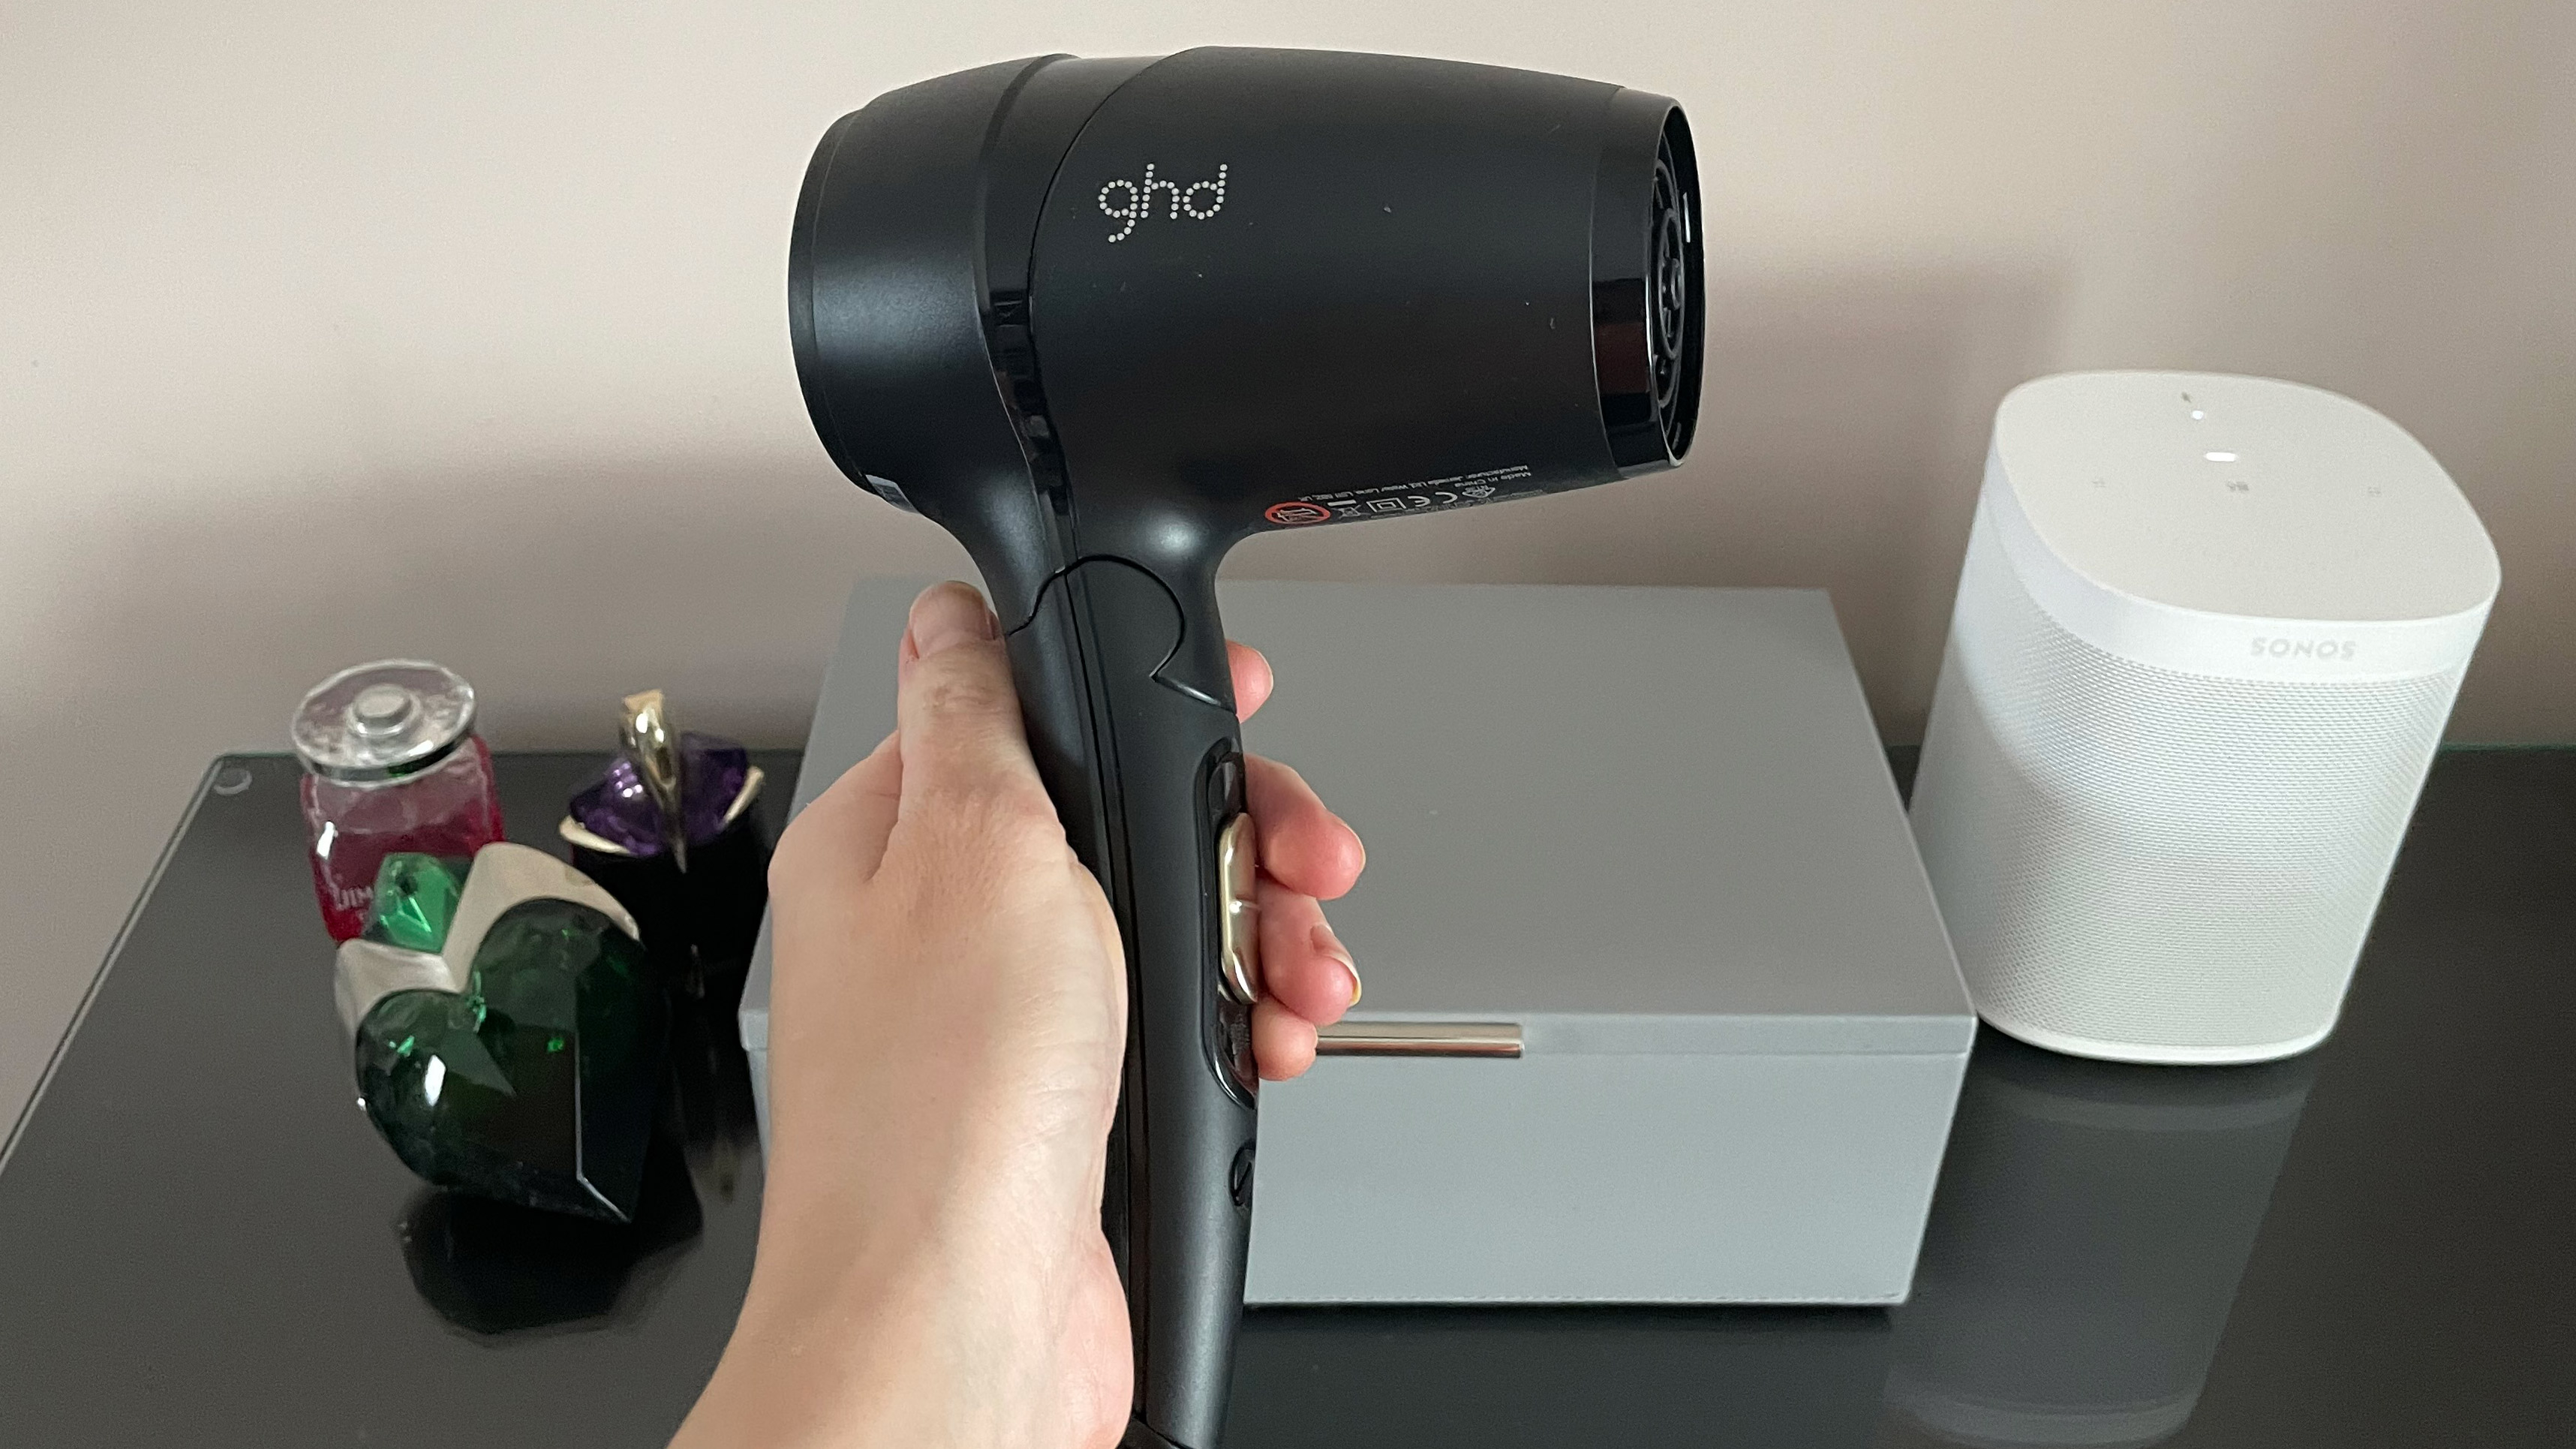 The GHD Flight hair dryer being held in a hand